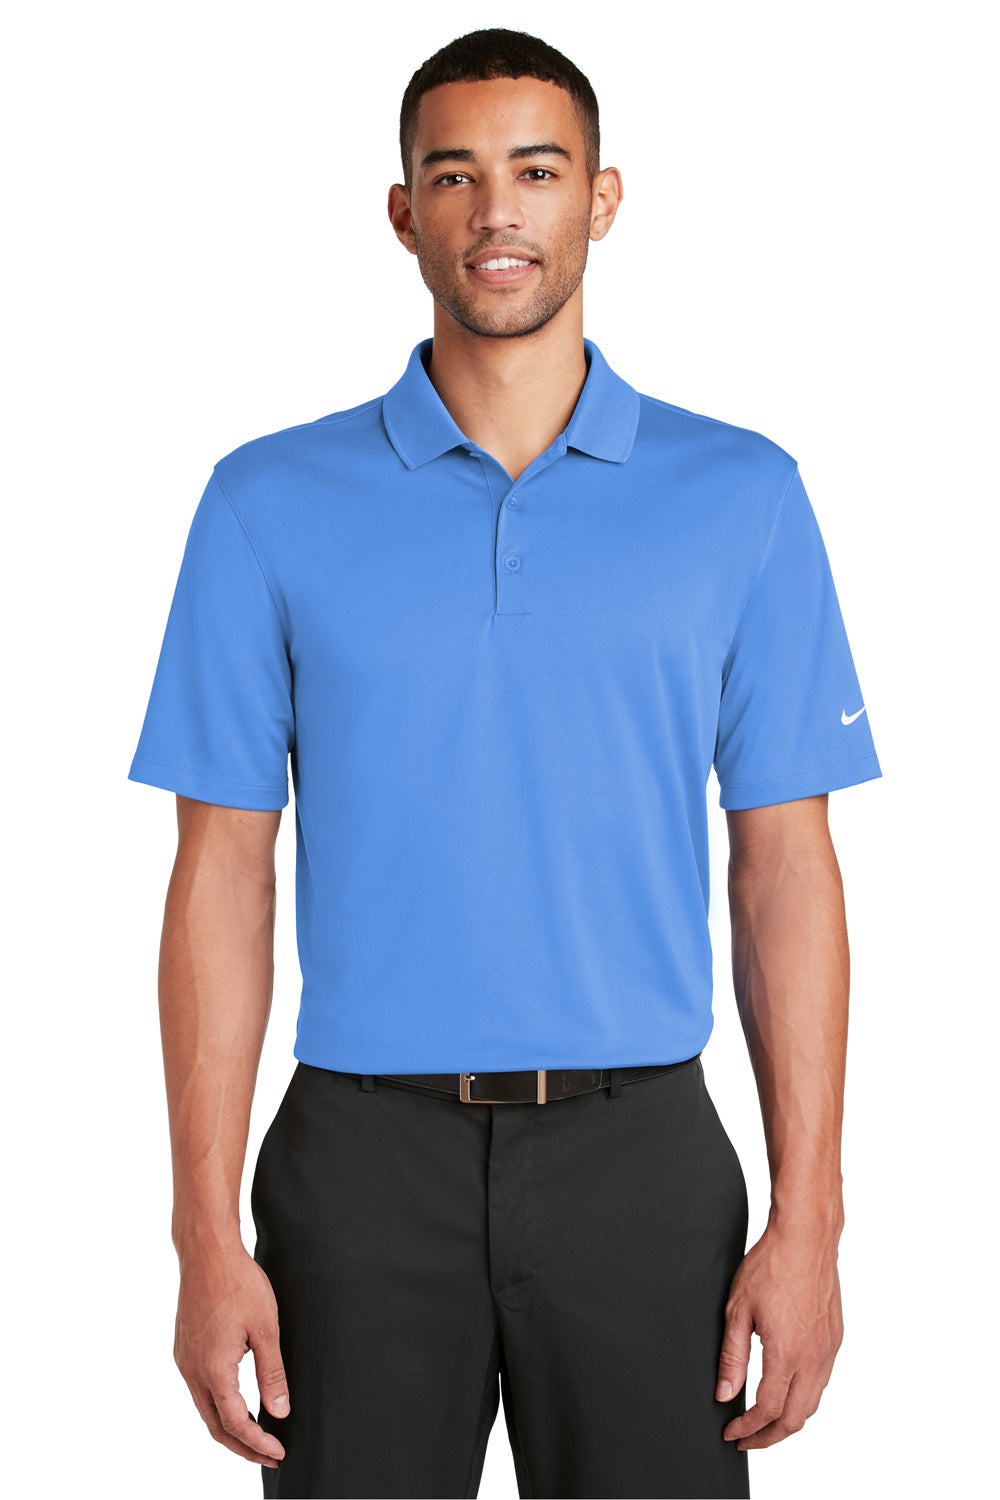 Nike 838956 Mens Players Dri-Fit Moisture Wicking Short Sleeve Polo Shirt Pacific Blue Front